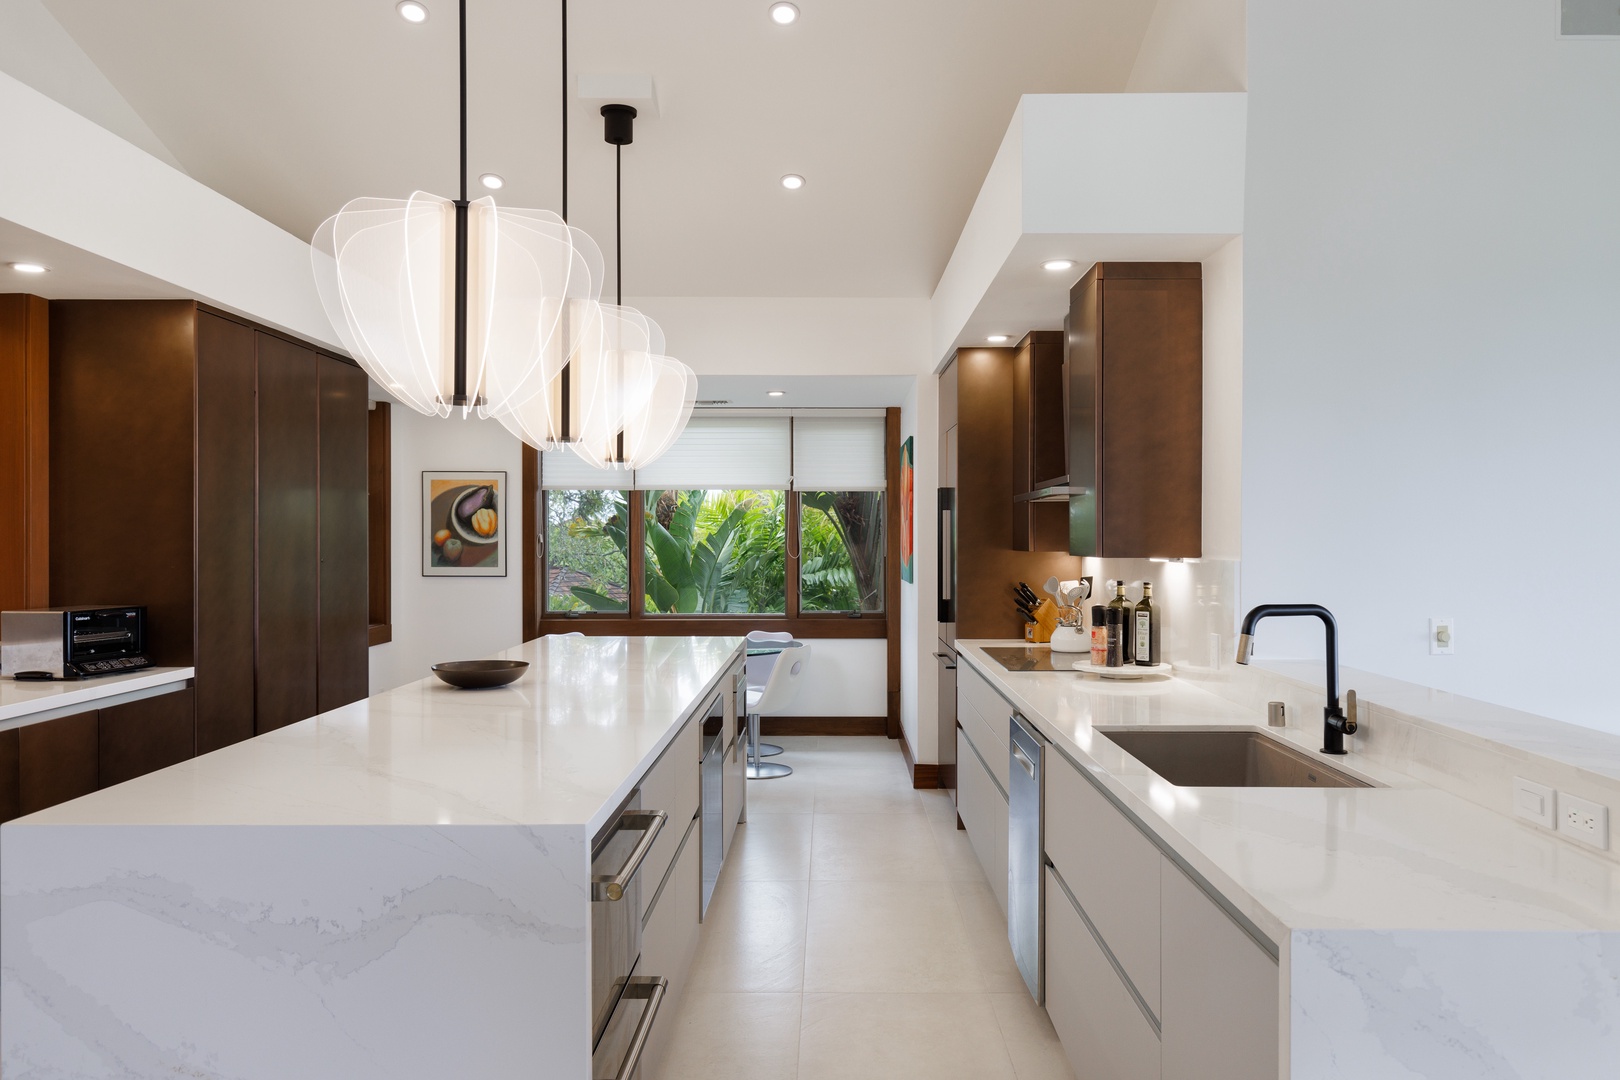 Kailua Kona Vacation Rentals, 3BD Fairways Villa (104A) at Four Seasons Resort at Hualalai - With top of the line appliances for your culinary ventures.